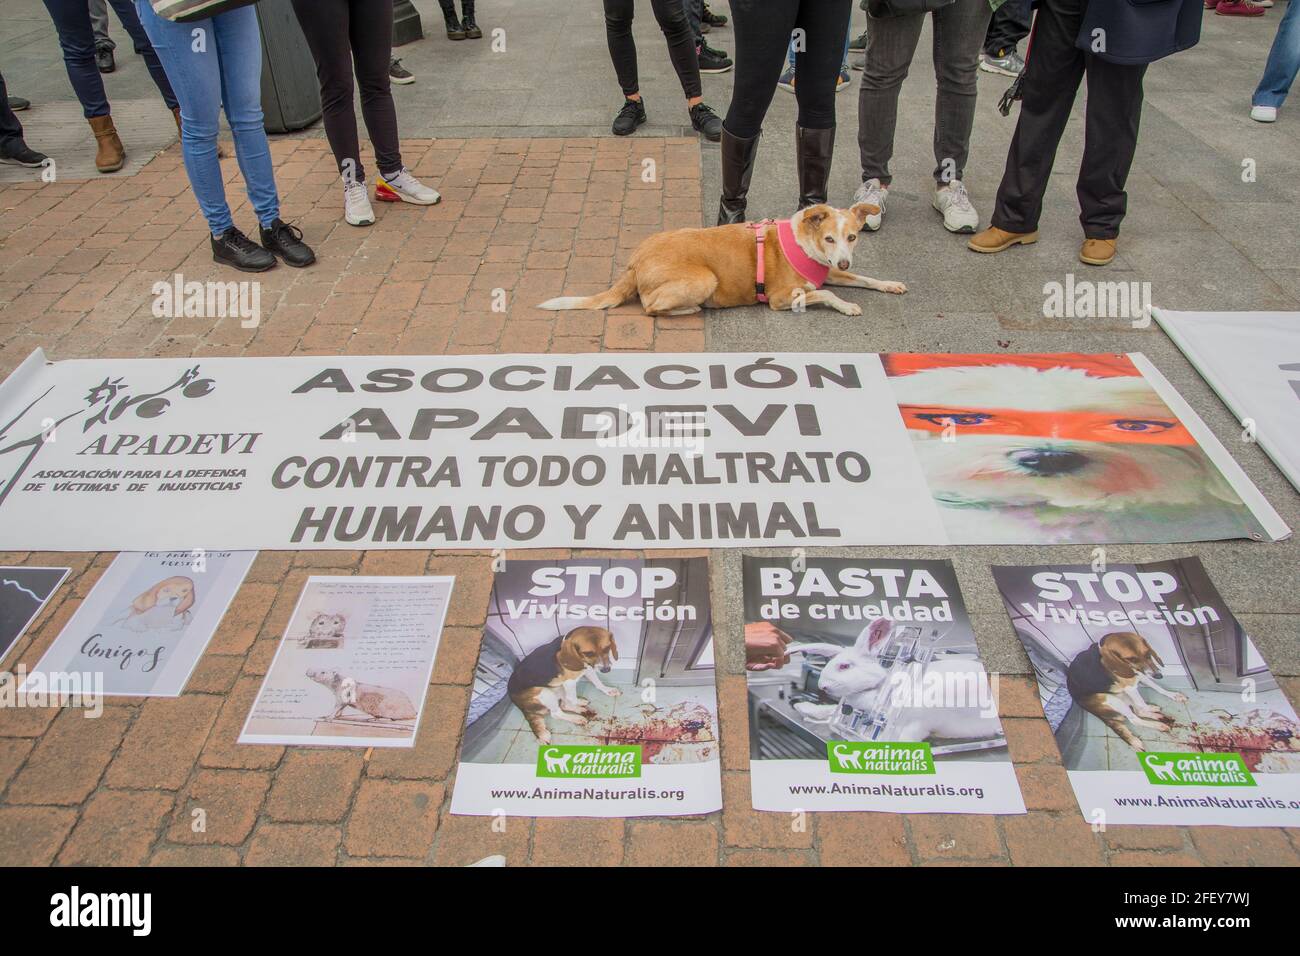 Protest called by the Free Fox Association against animal experimentation  the animal rights association Free Fox has concentrated against animal  experimentation in the Plaza de Jacinto Benavente, in Madrid. Every year,  more